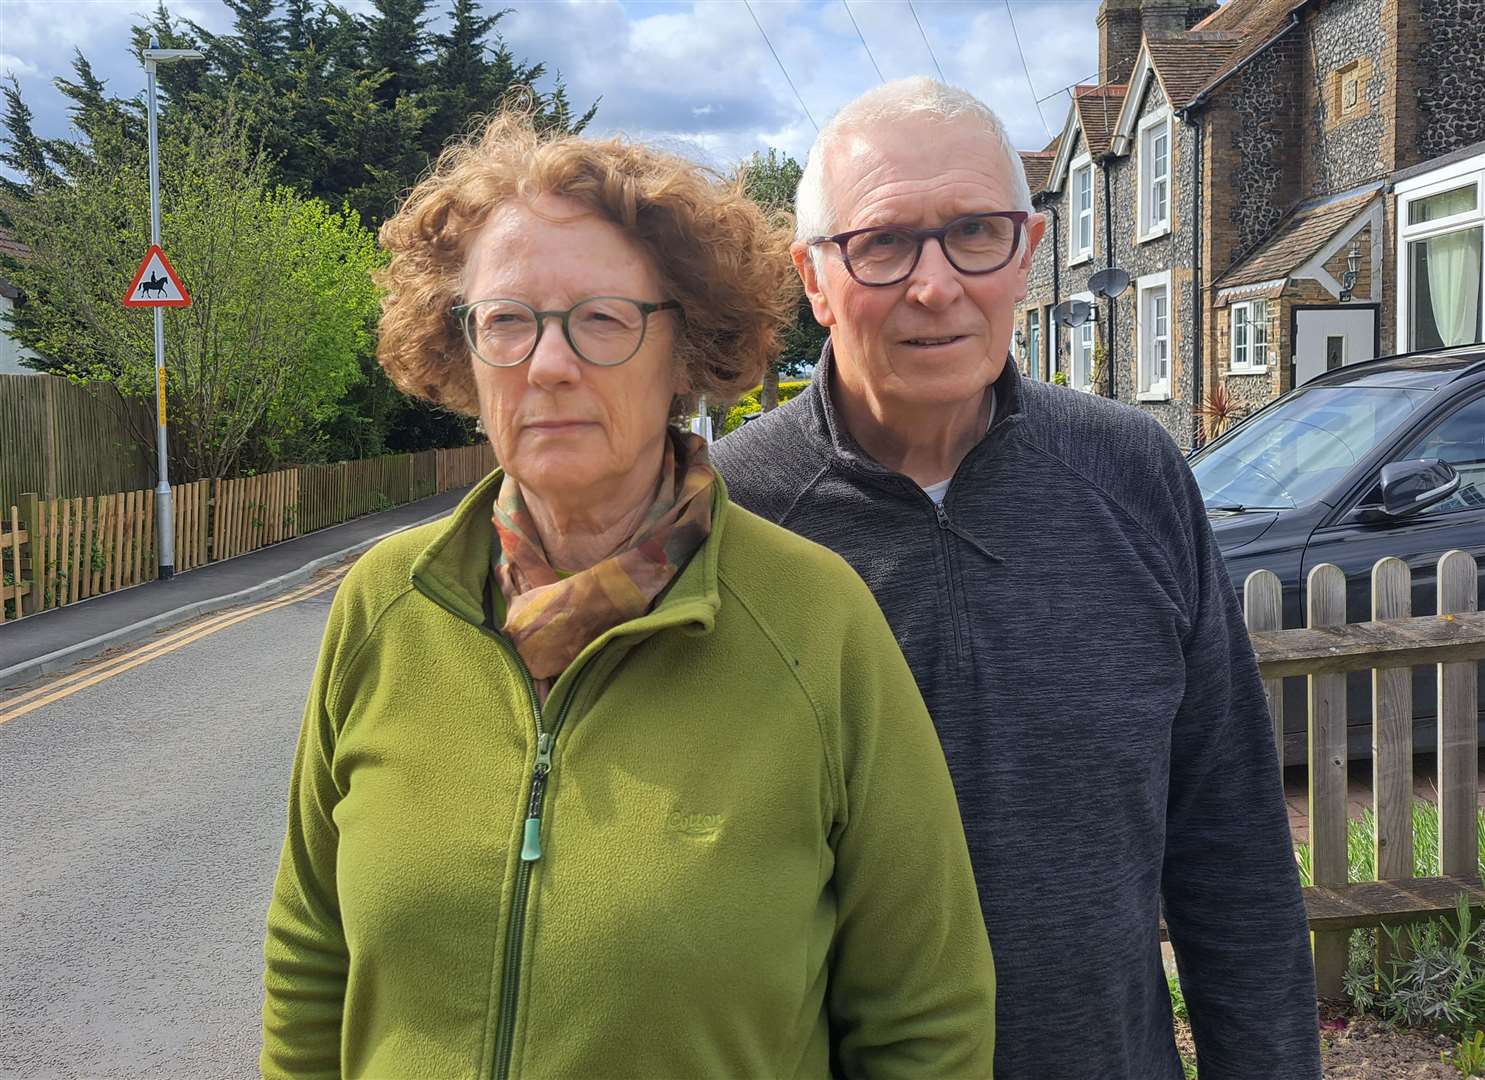 Lynn and Peter French live close to the development at Cross Road